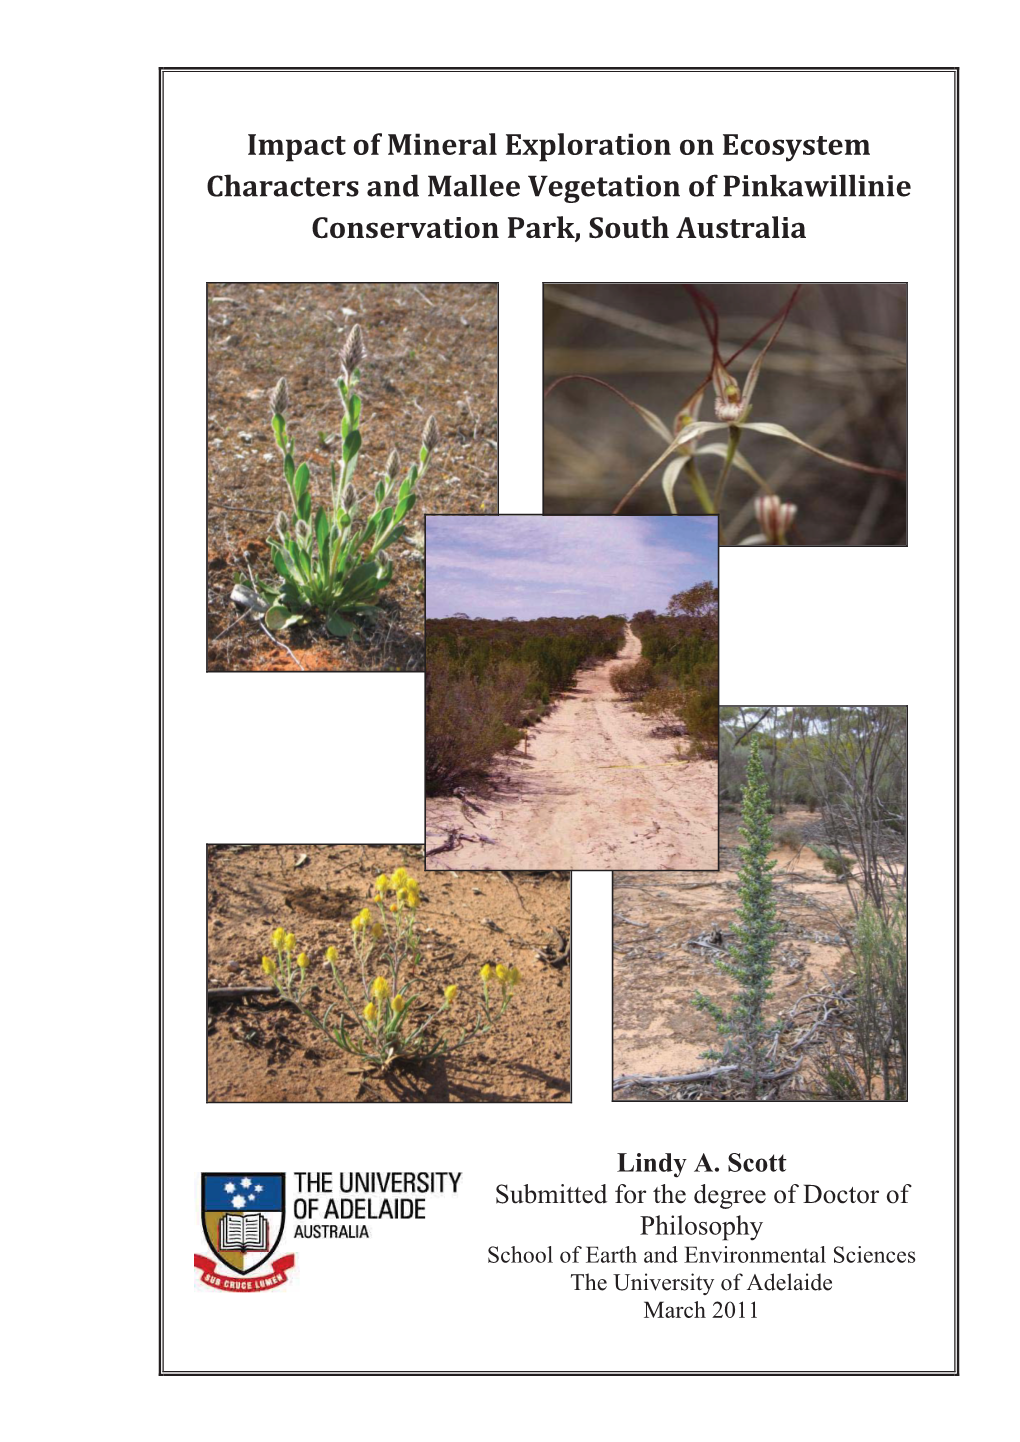 Impact of Mineral Exploration on Ecosystem Characters and Mallee Vegetation of Pinkawillinie Conservation Park, South Australia